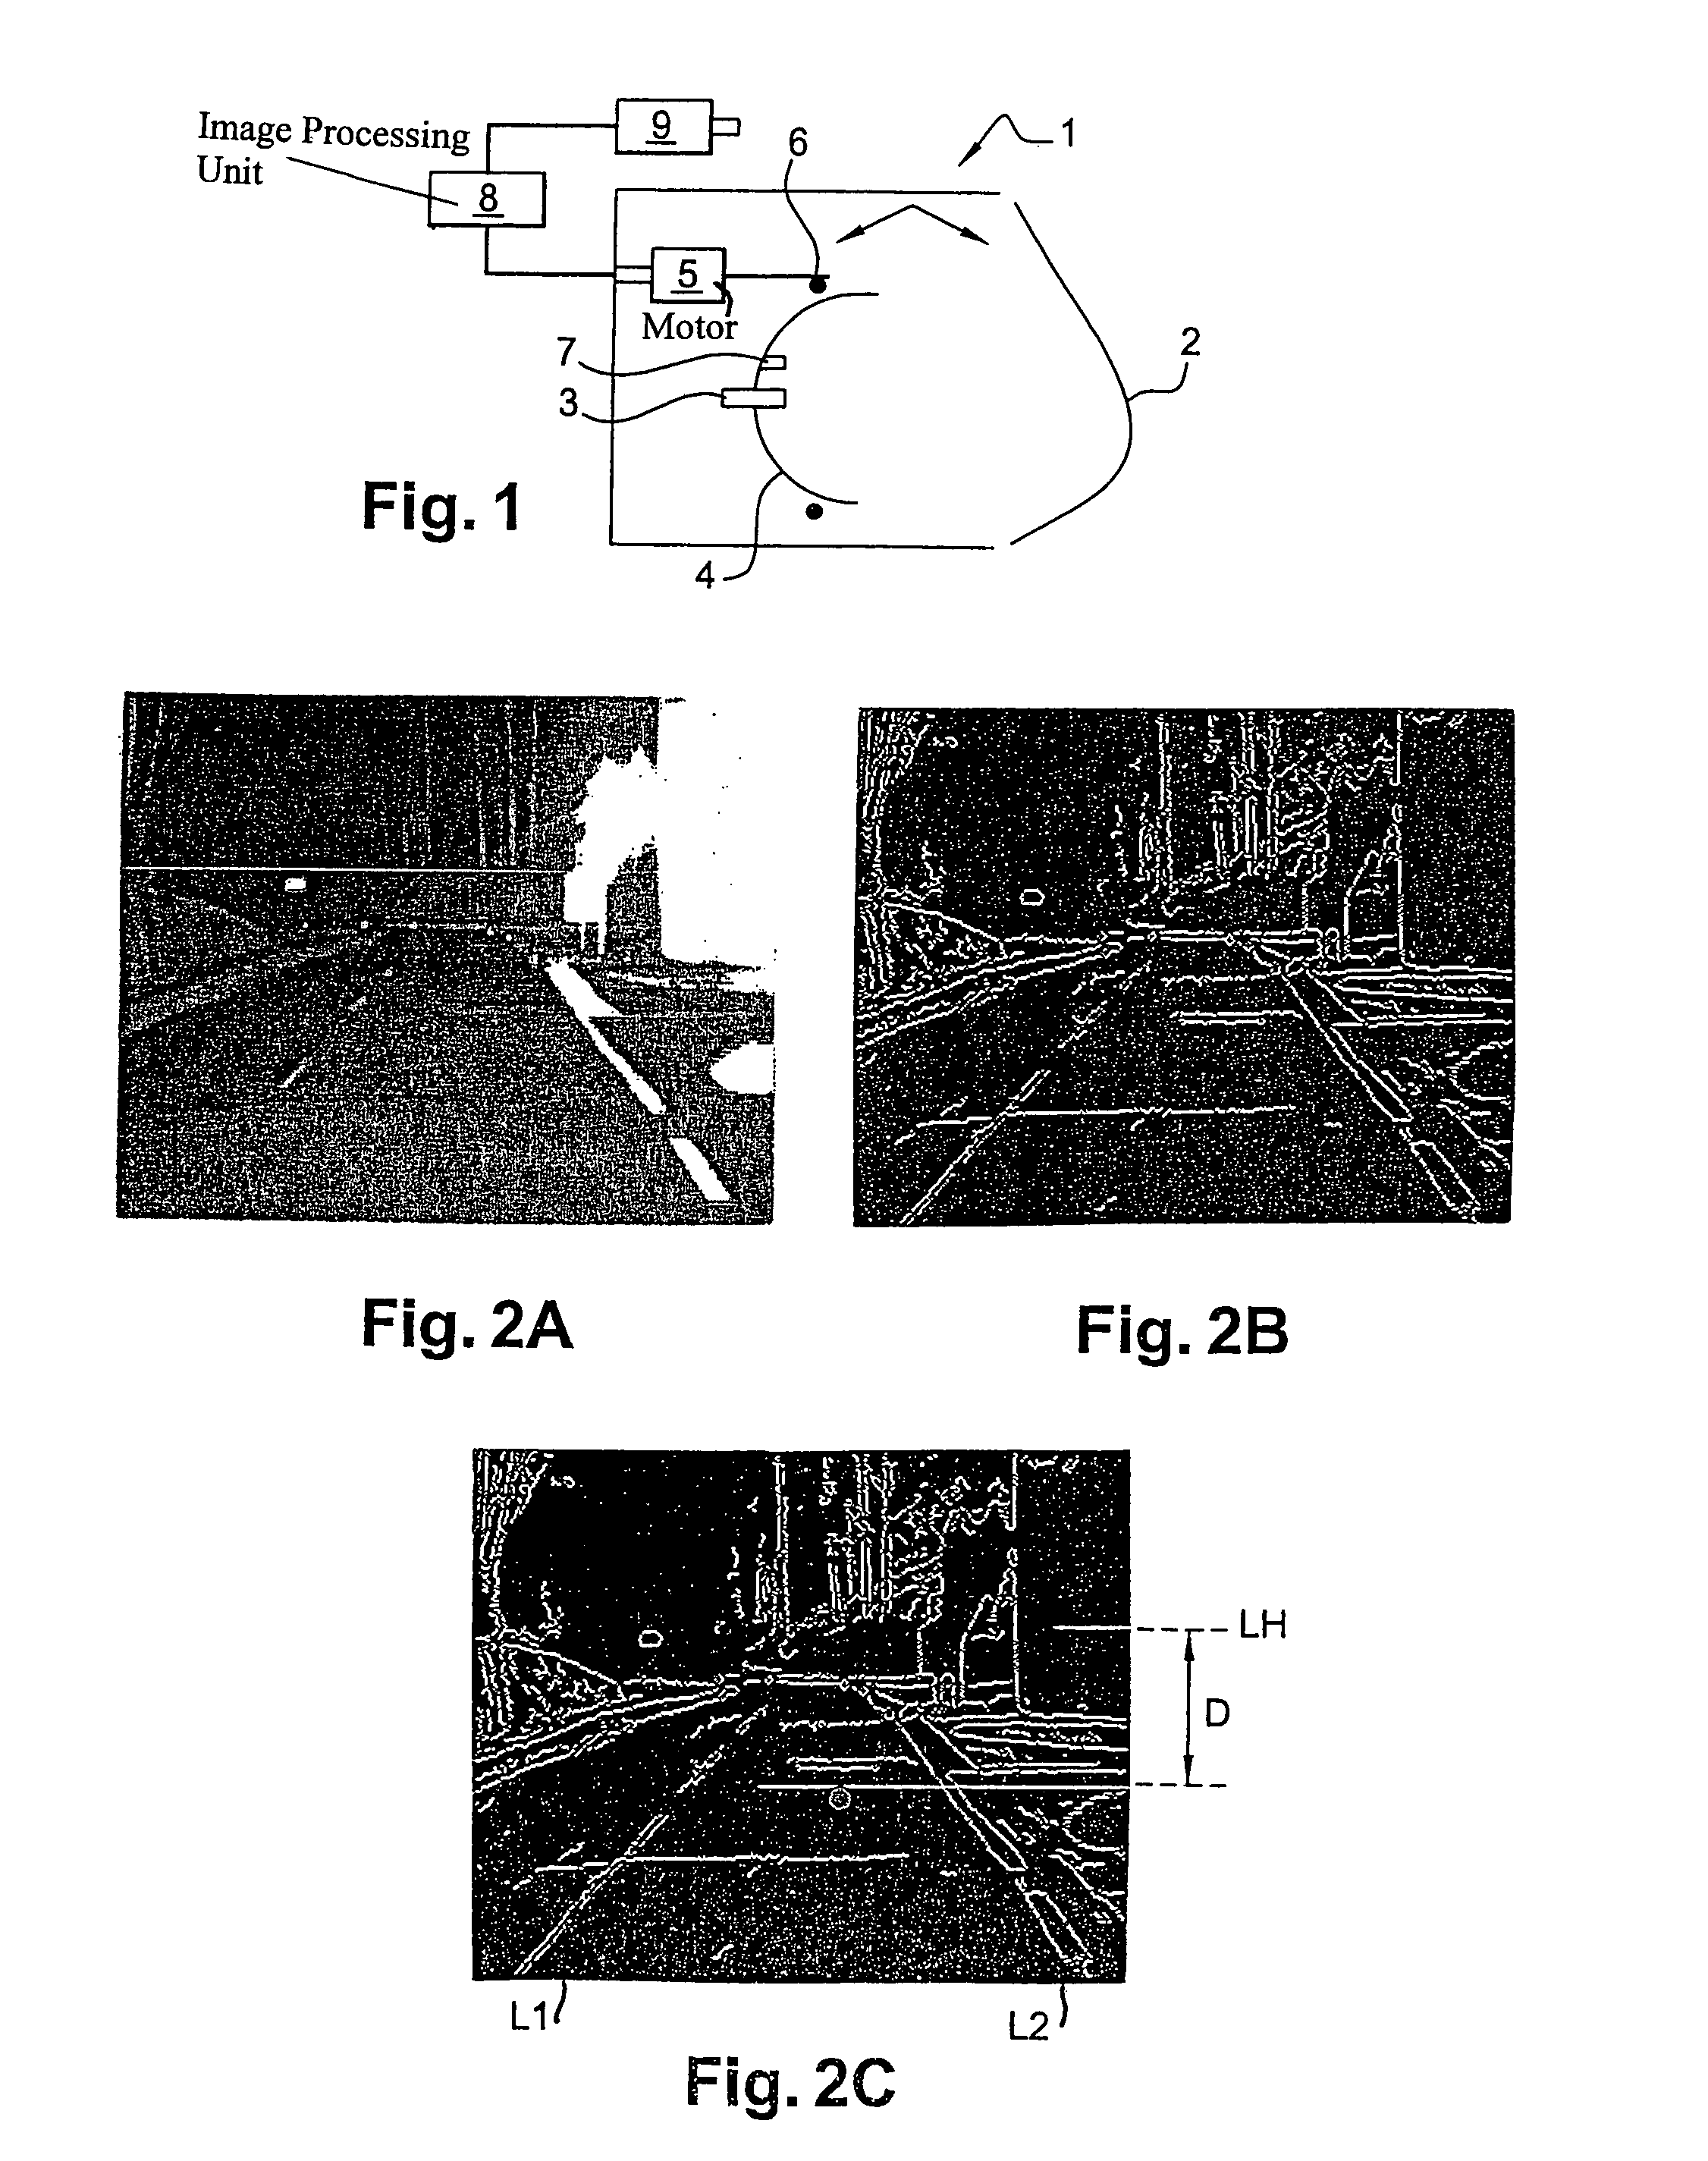 System for in-situ control of the orientation of a vehicle headlamp and process for its implementation